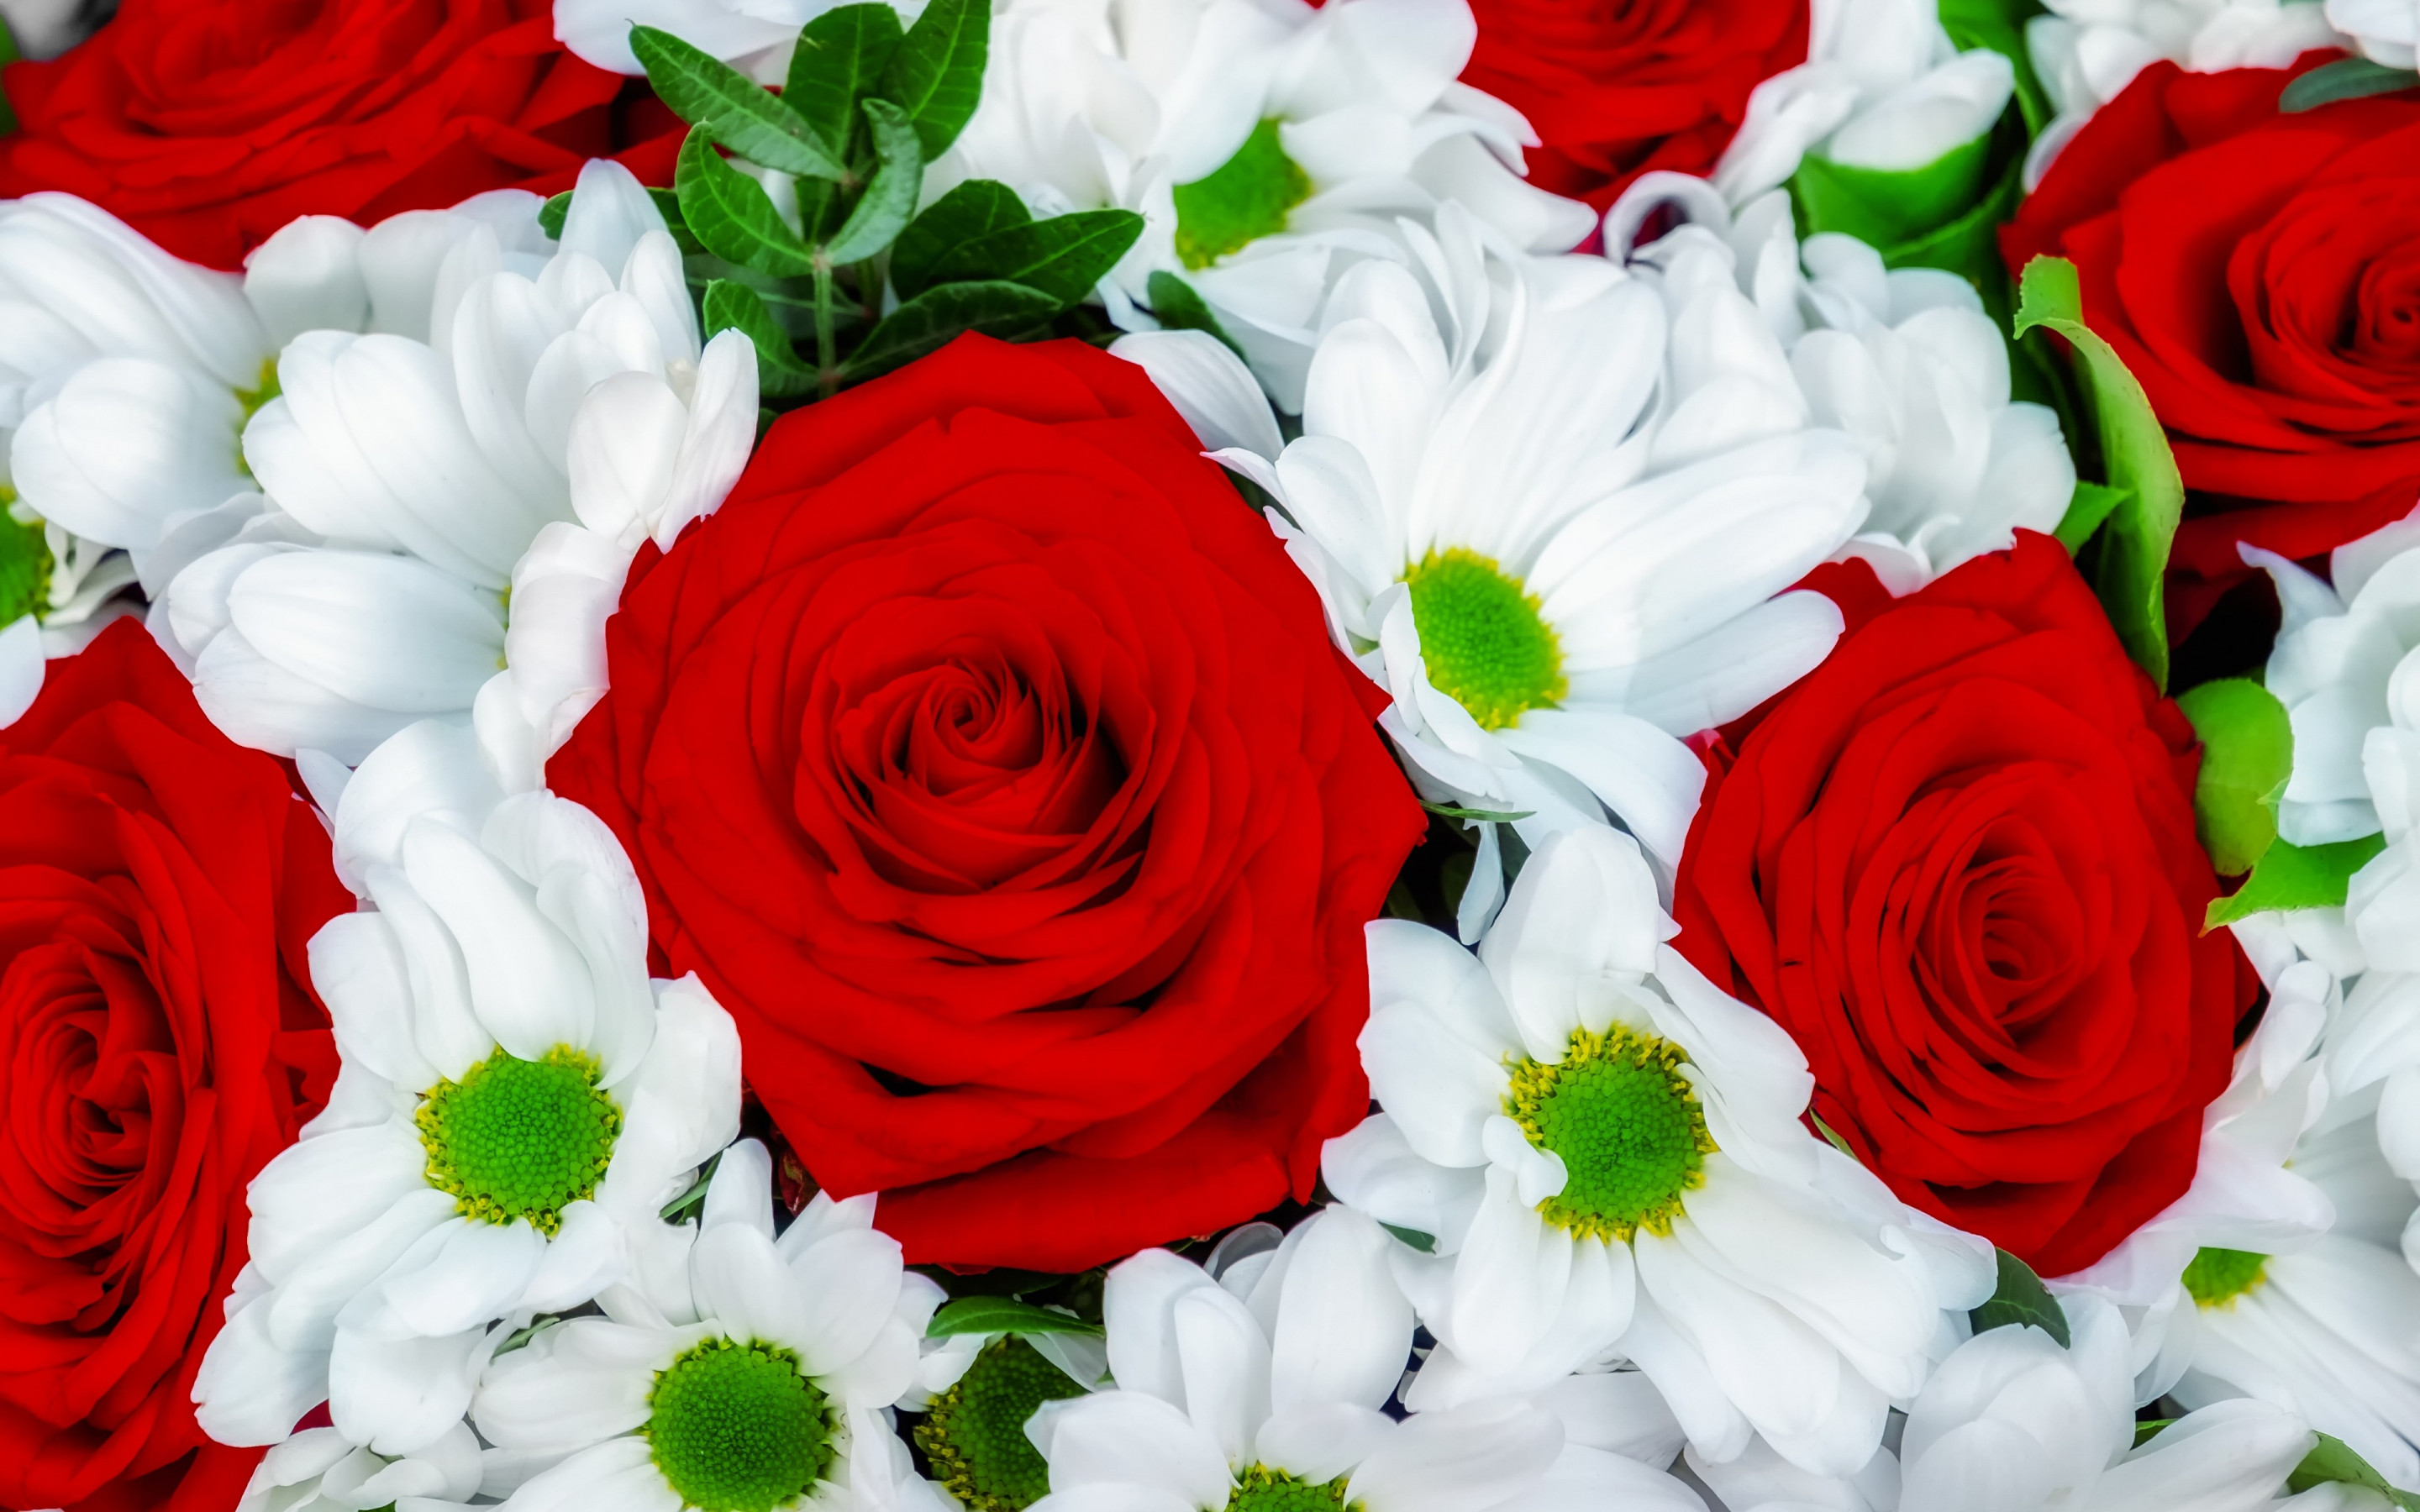 Roses and daisies bouquet wallpaper 2880x1800